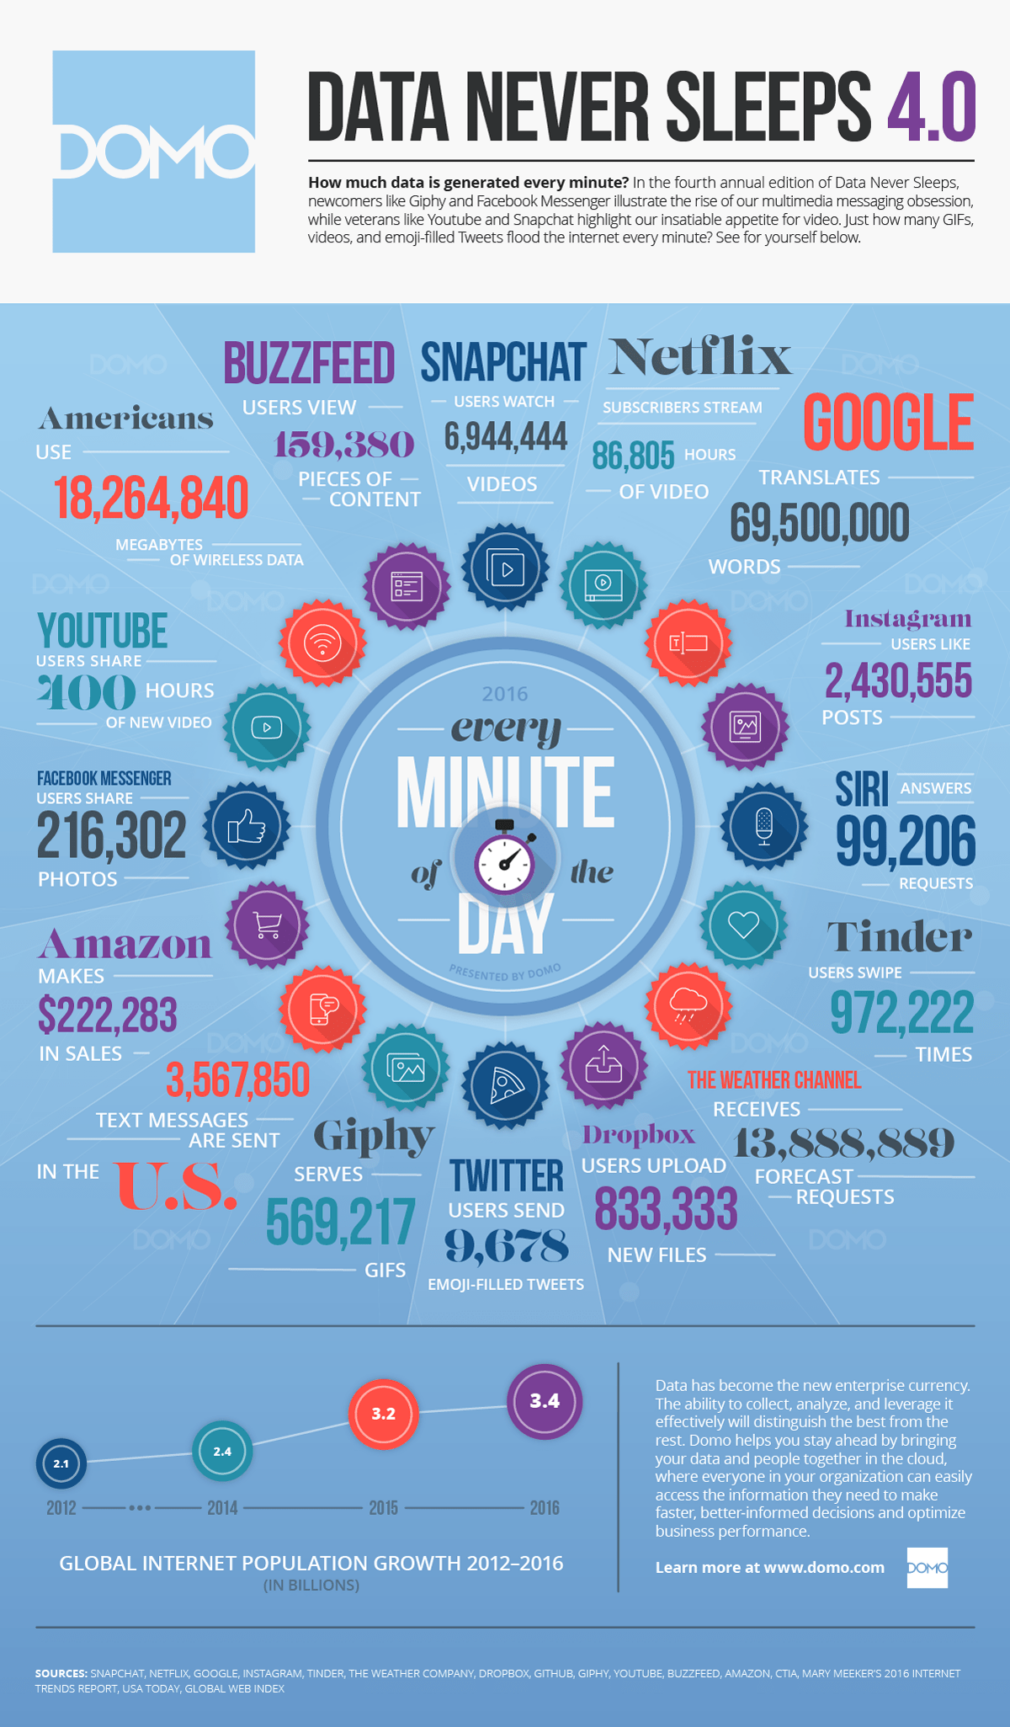 Data Generation Every Minute, 2012-2016